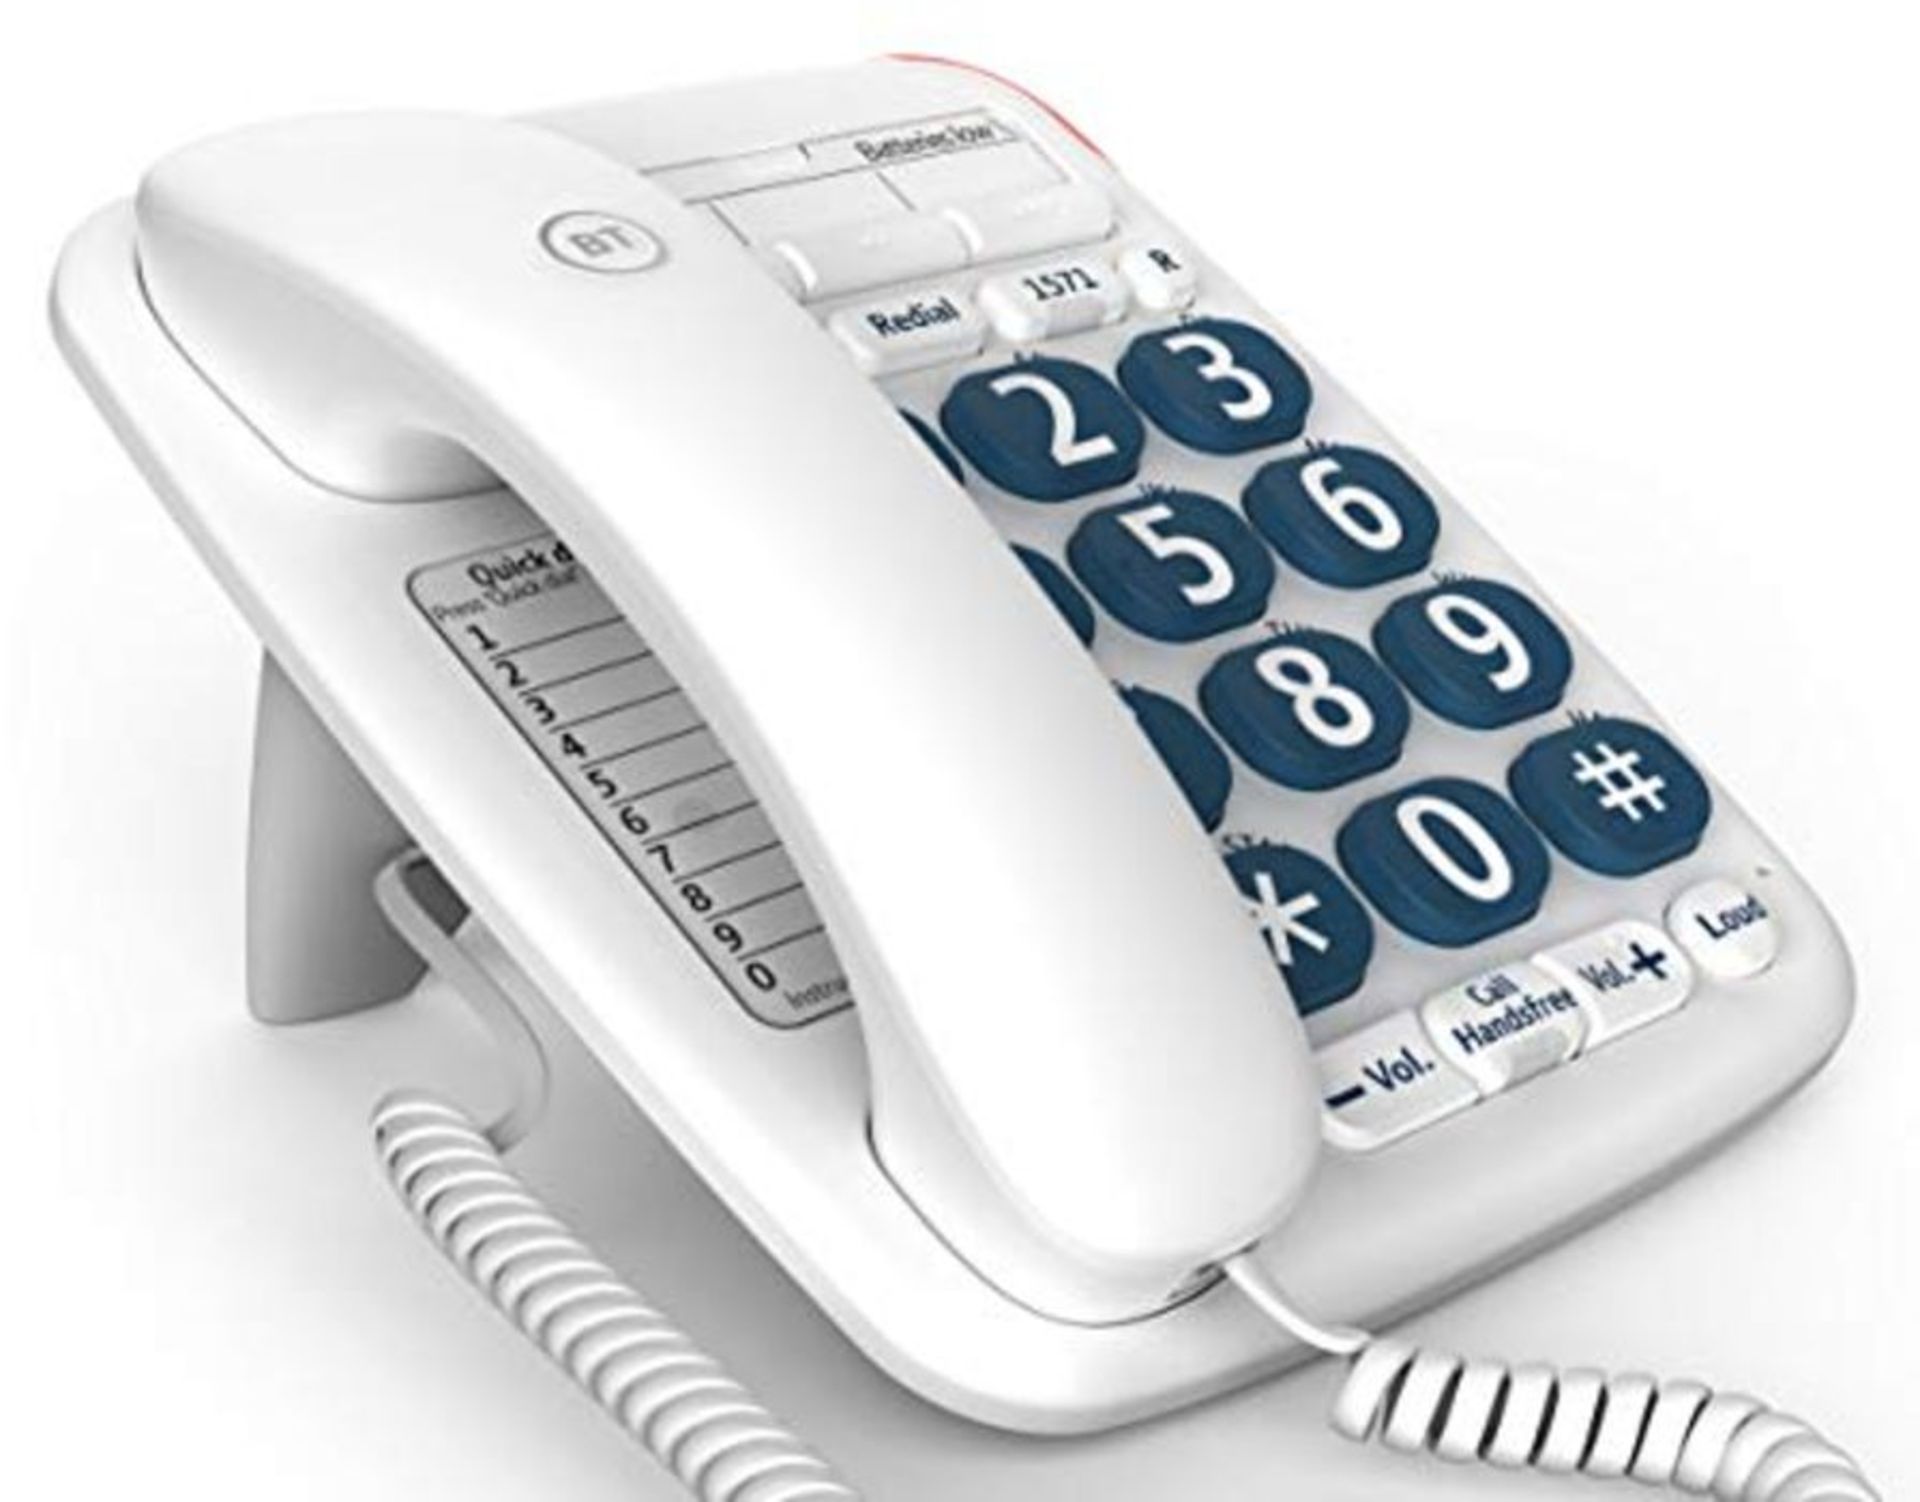 BT Big Button 200 Corded Telephone, White